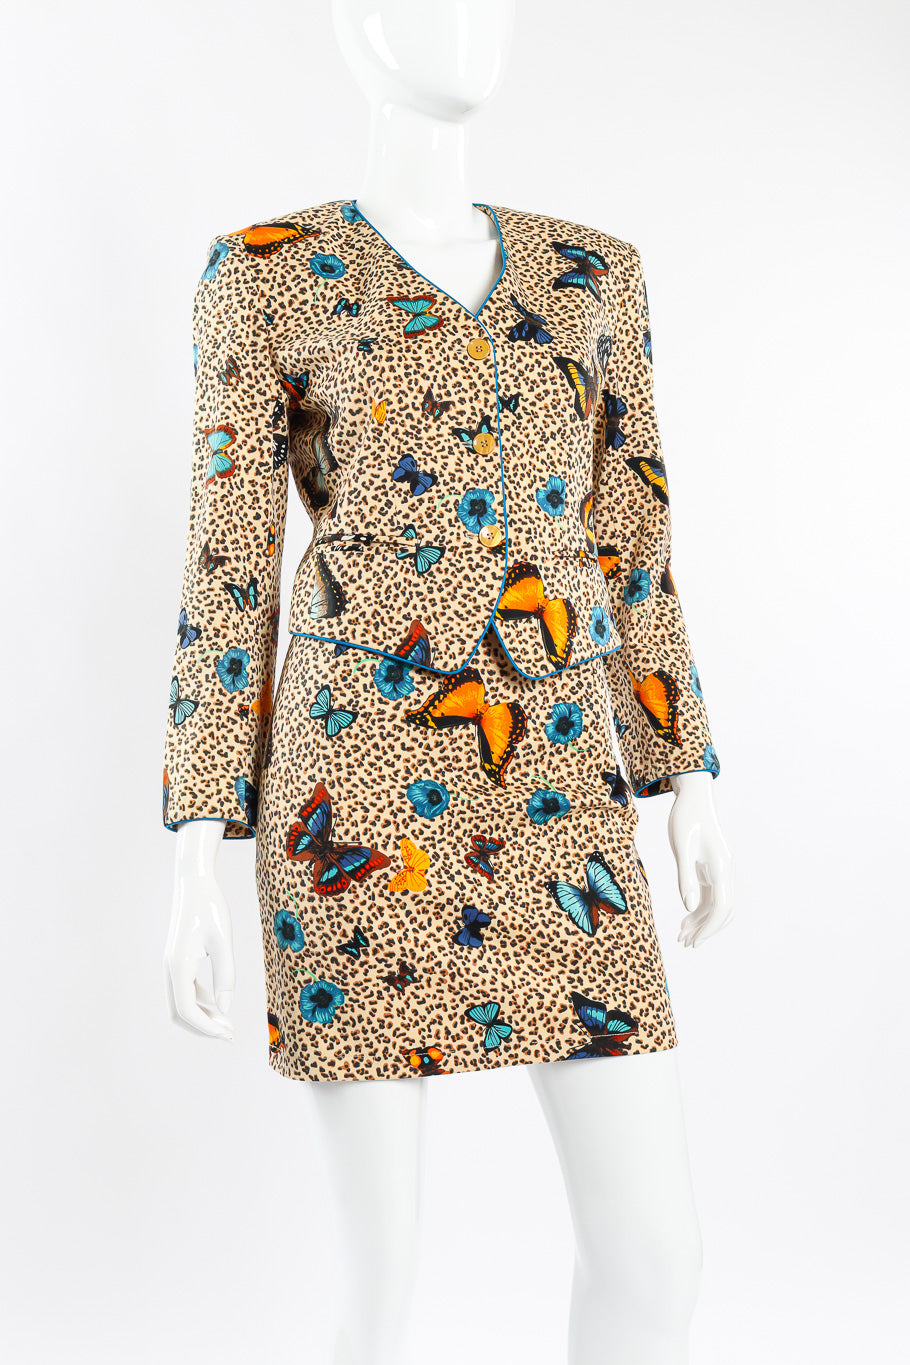 Butterfly jacket and skirt set by Kenzo on mannequin front close @recessla